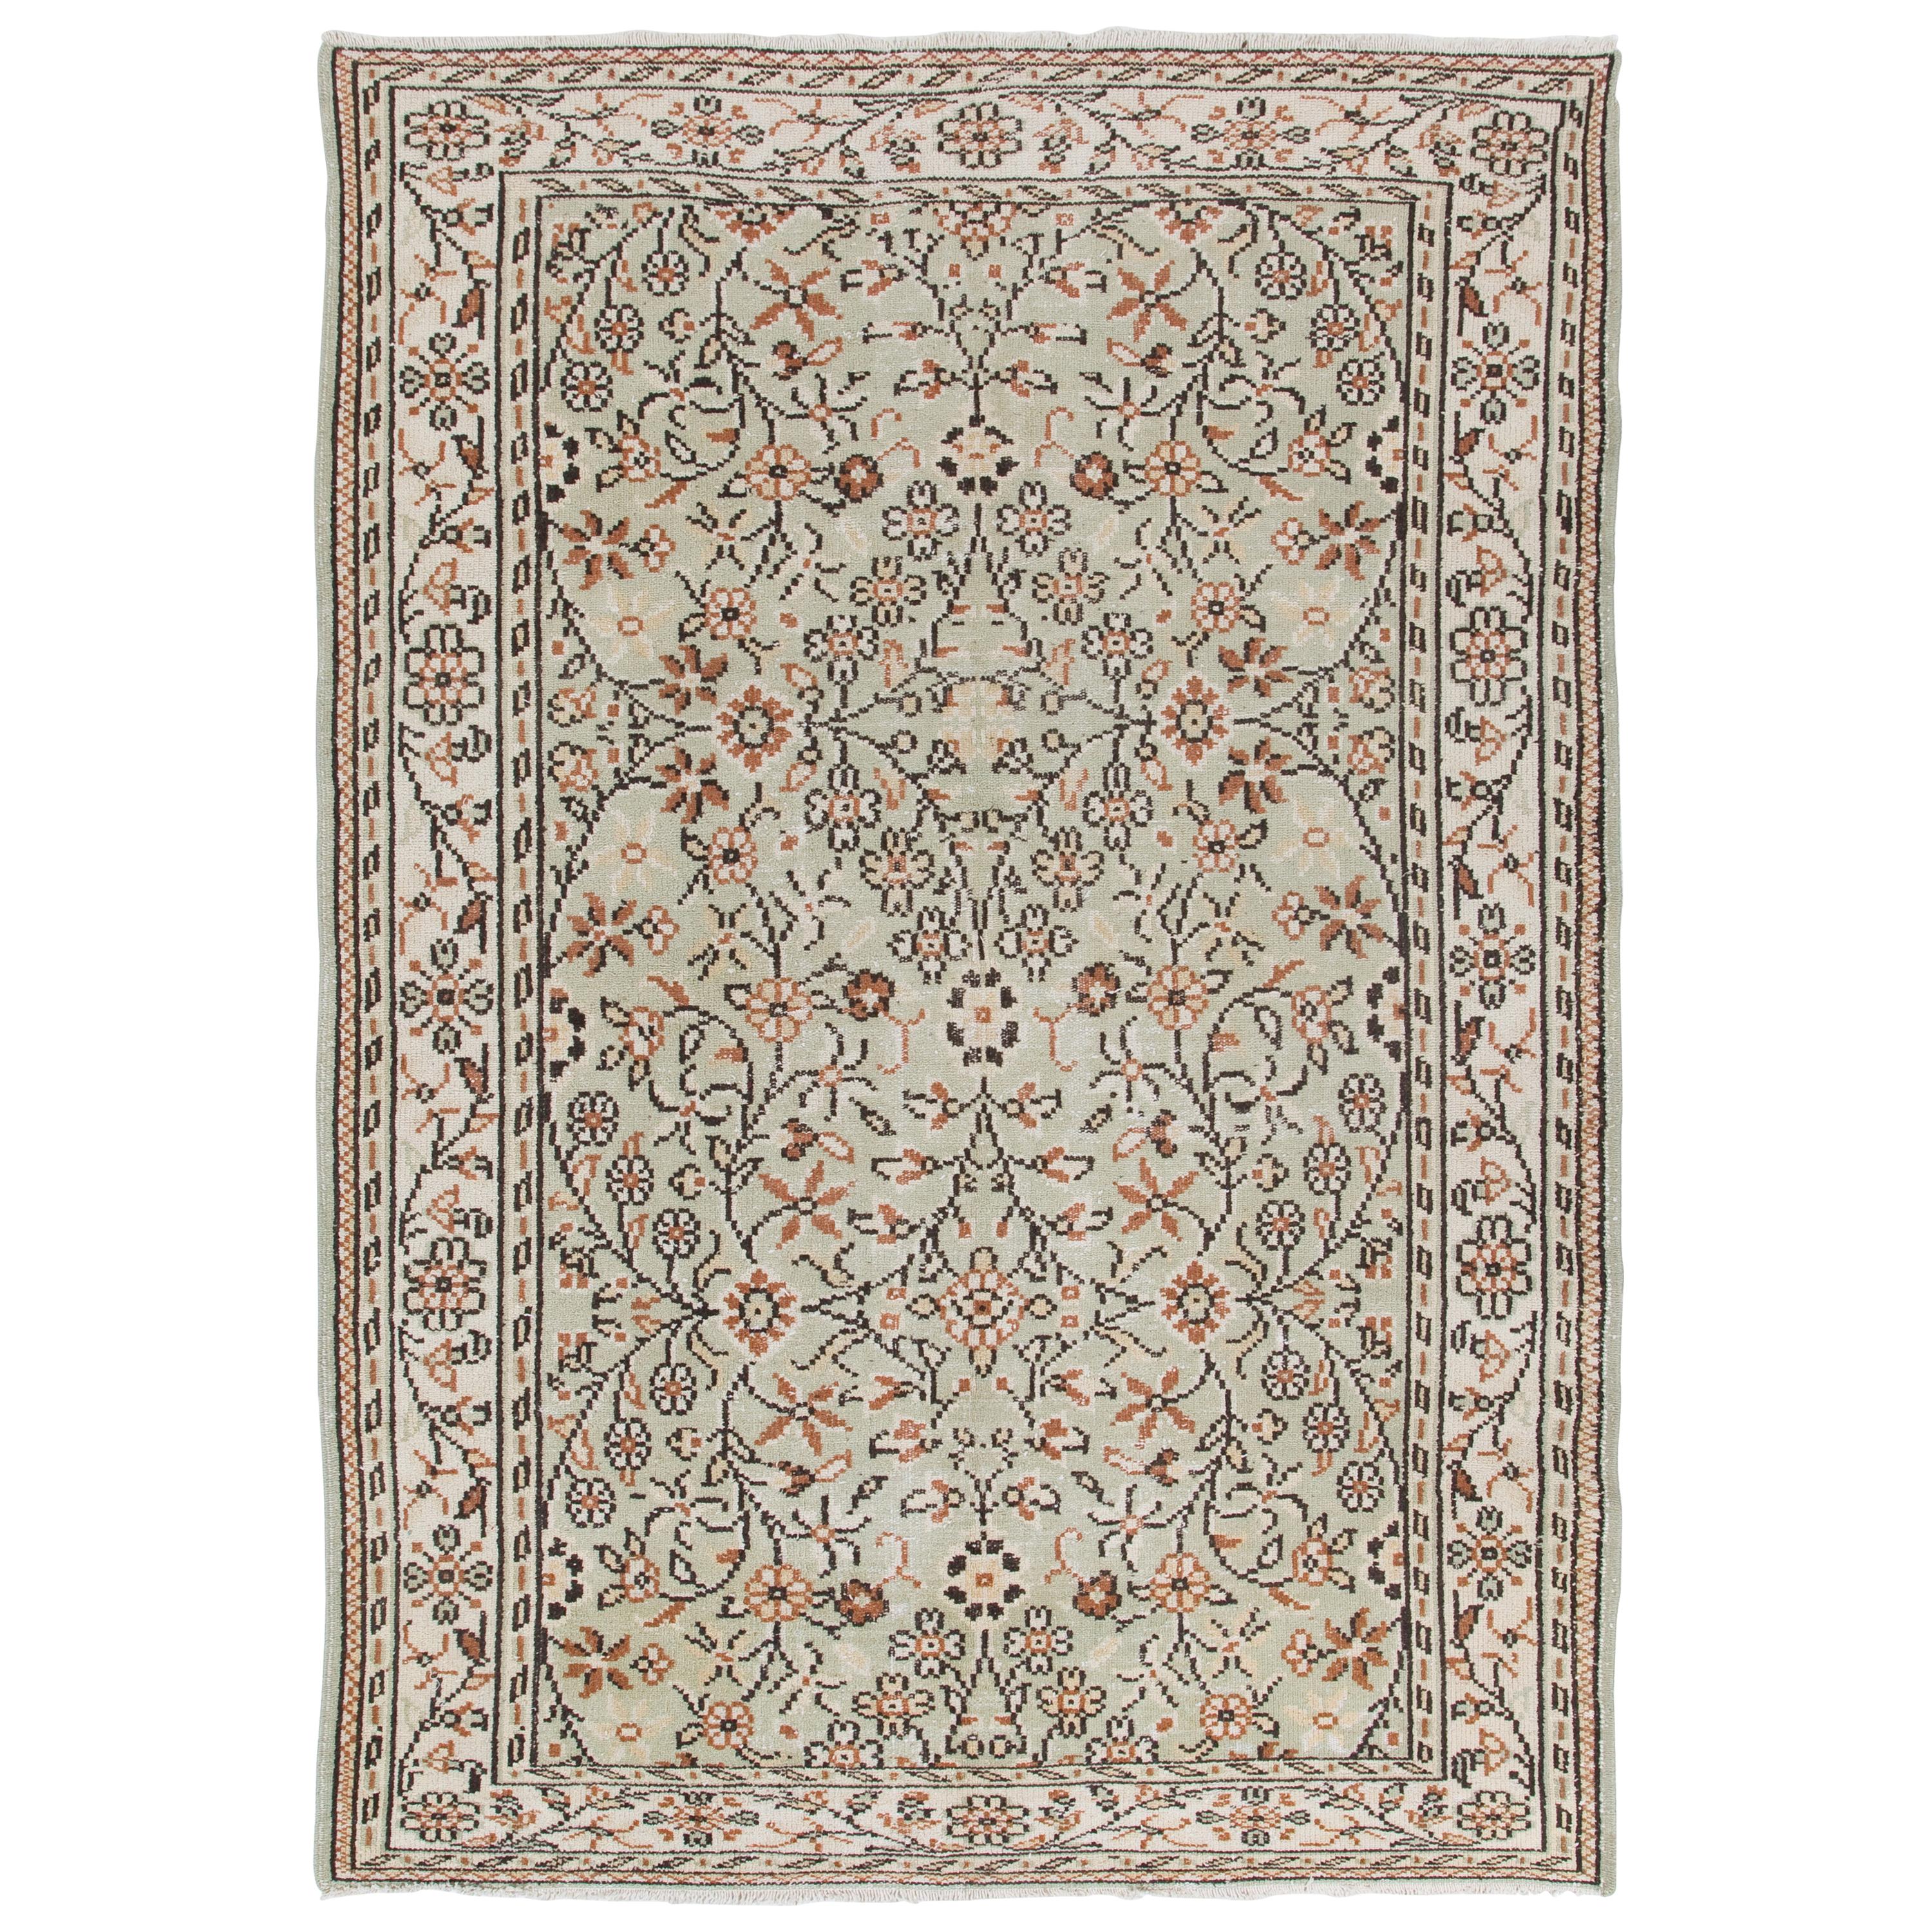 6.2x9 ft Vintage Hand-Knotted Turkish Floral Wool Rug in Cream and Pastel Green